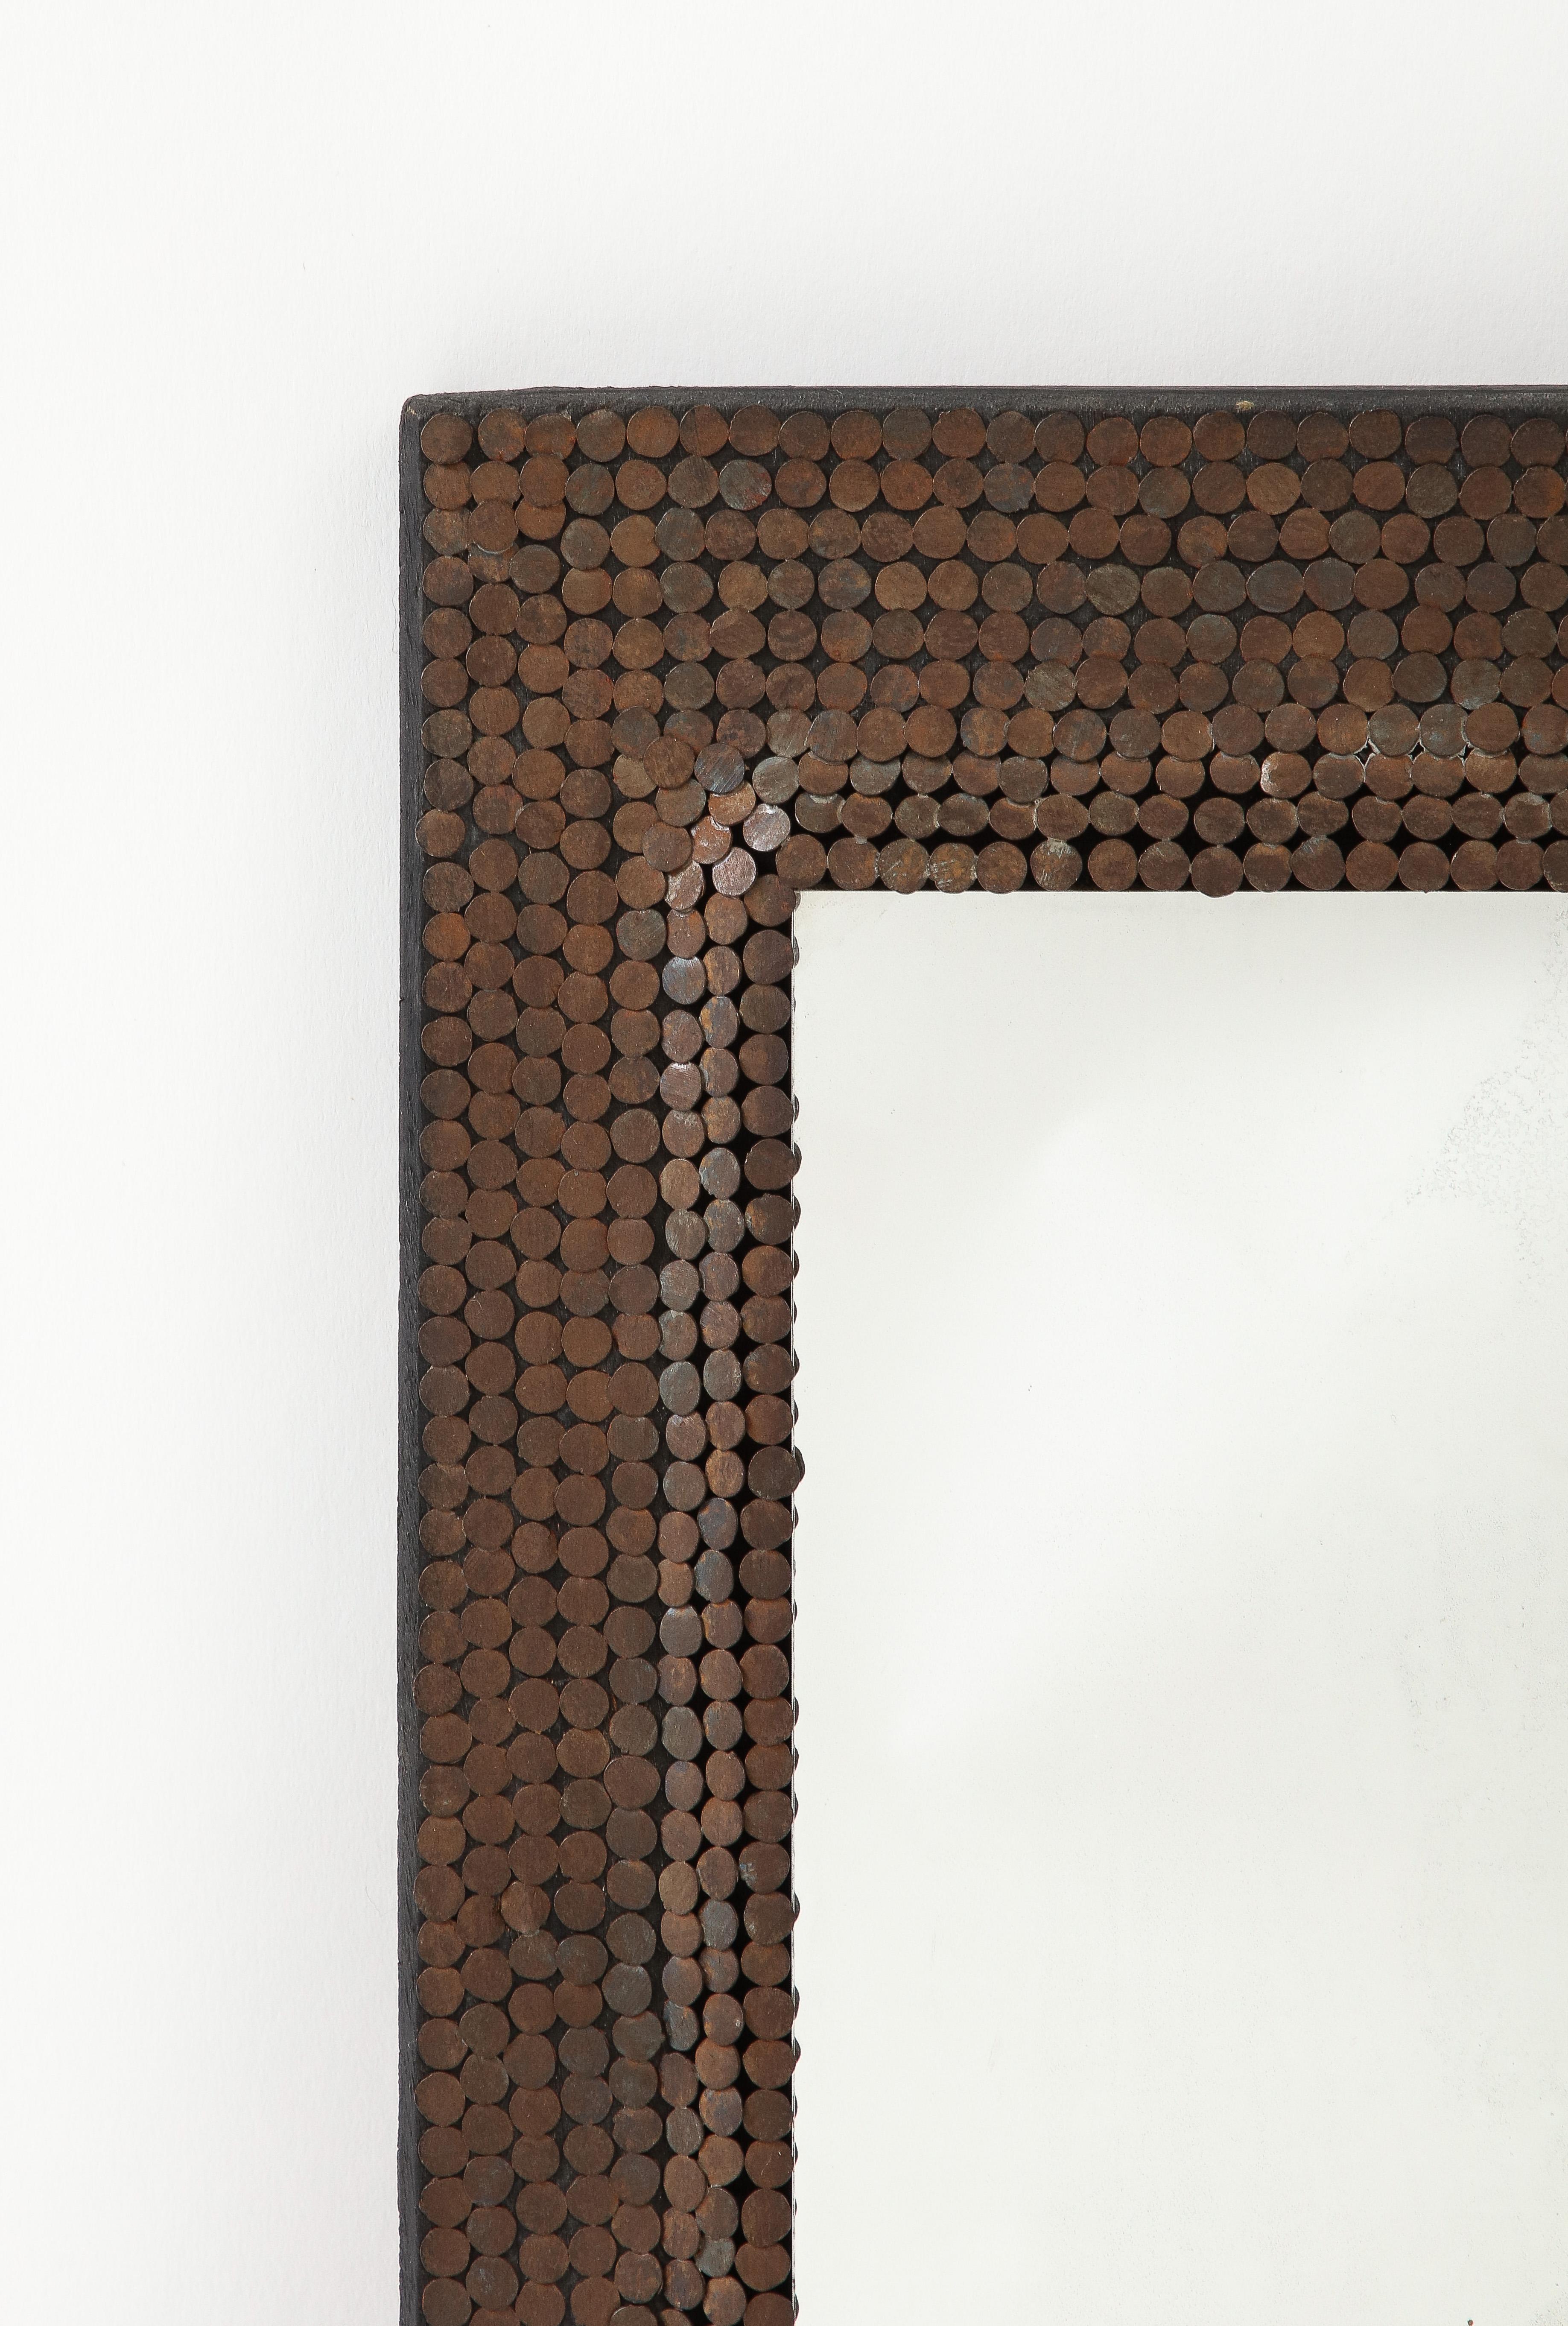 Early 20th Century Early 20th C. Hand Made Mirror Studded with Nails, France